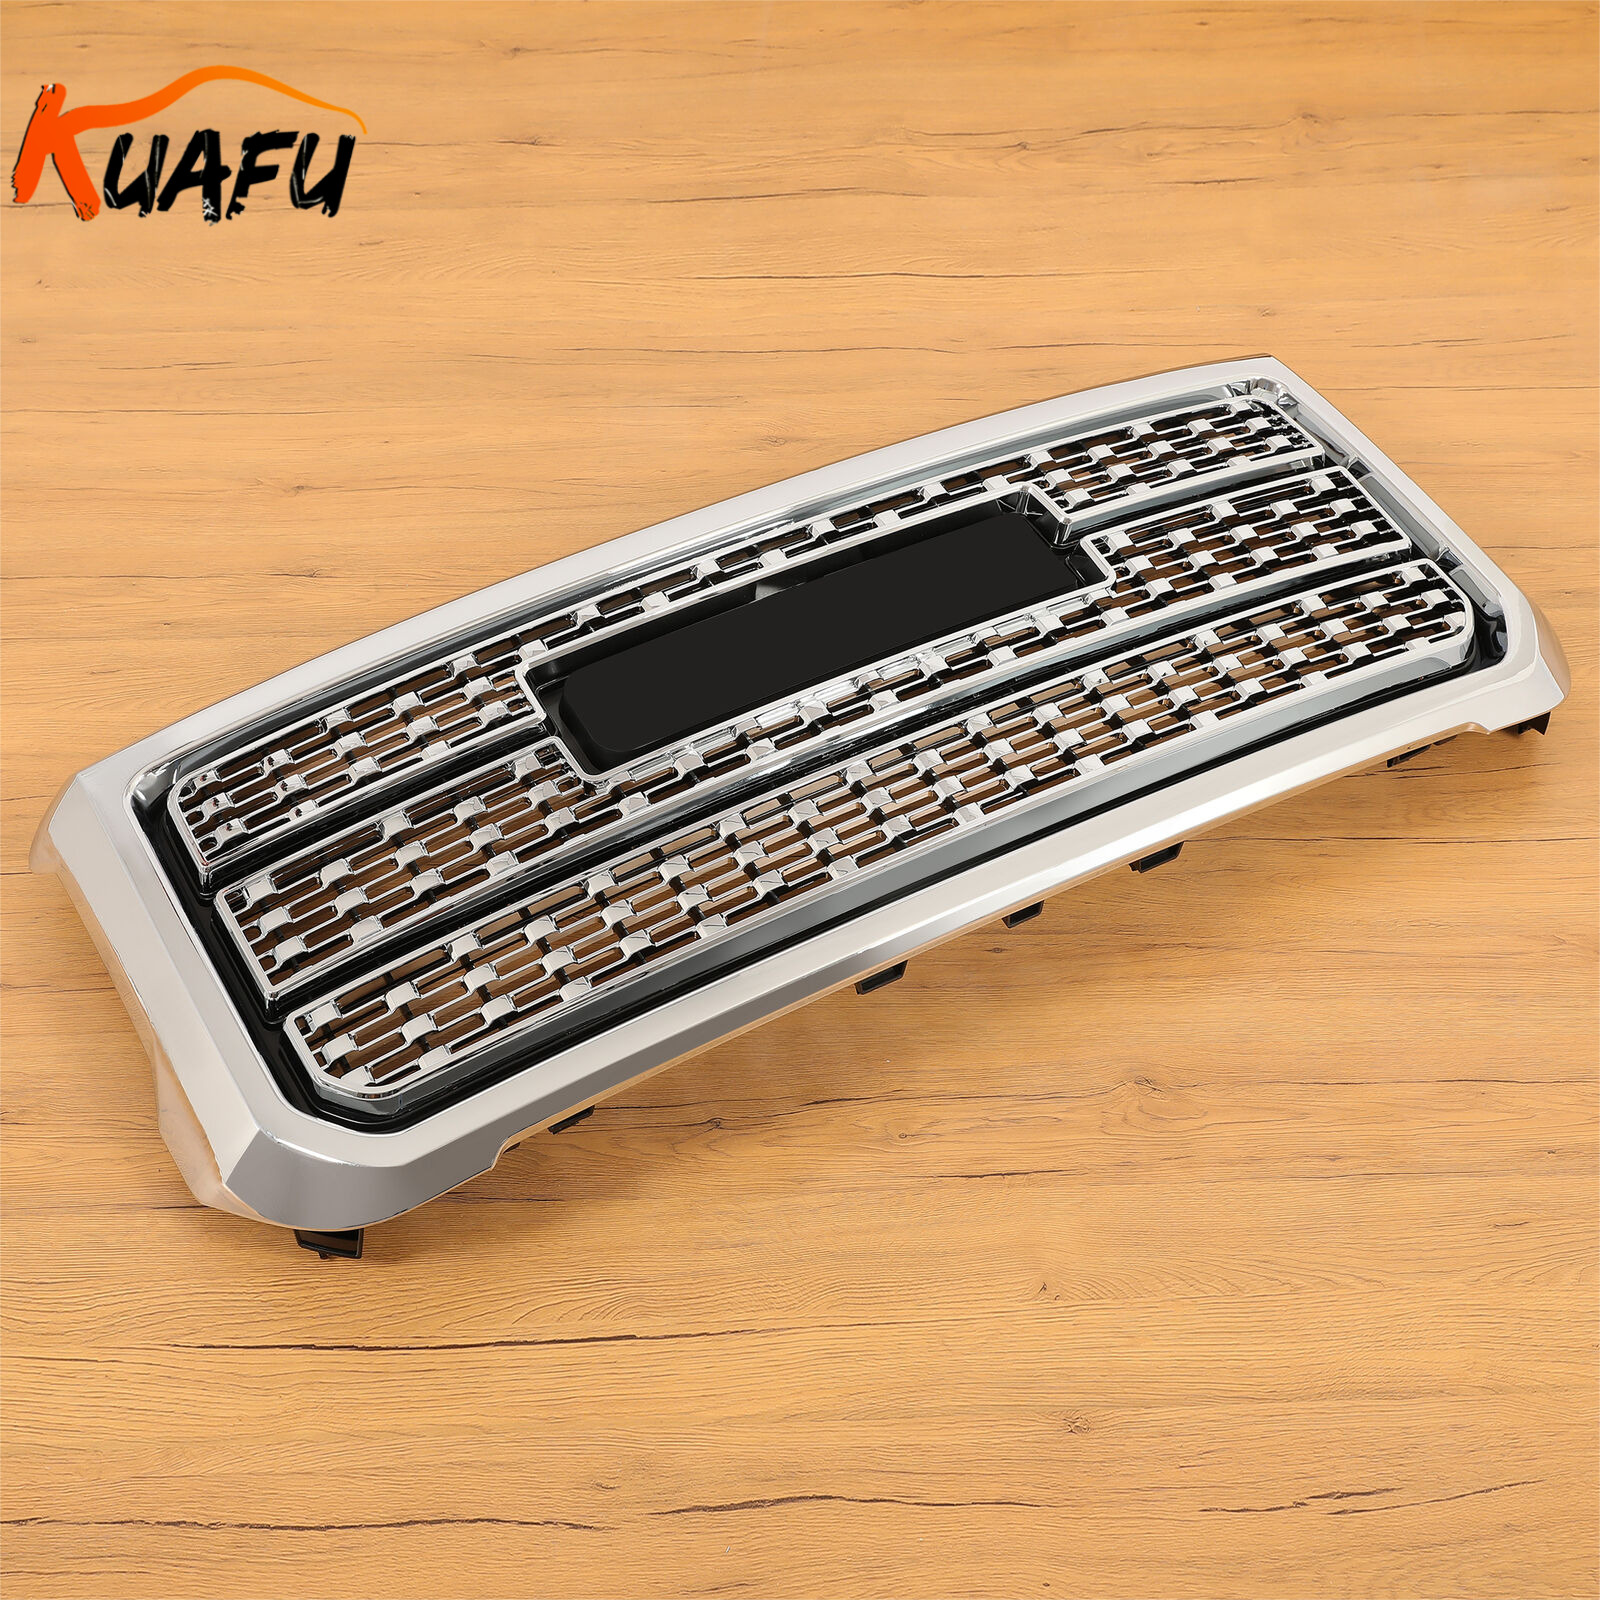 KUAFU For GMC Sierra 2500HD 3500HD 2015-2019 Front Grille Chrome ABS 84542600